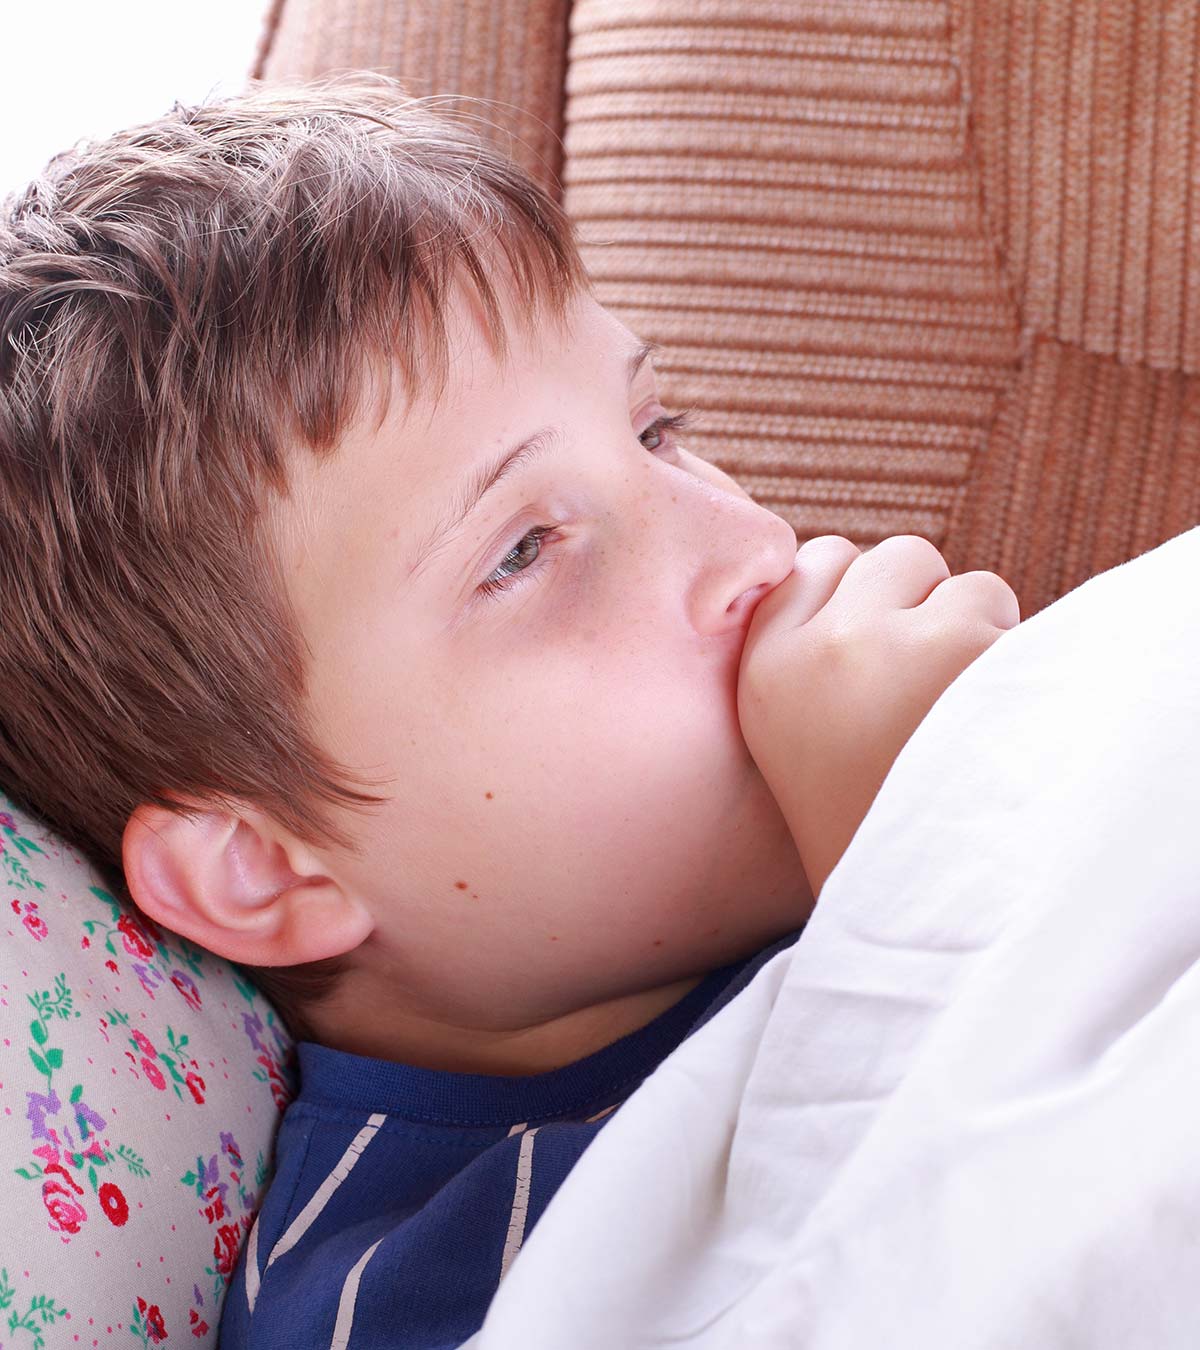 Tuberculosis In Children - Causes, Symptoms, And Treatment